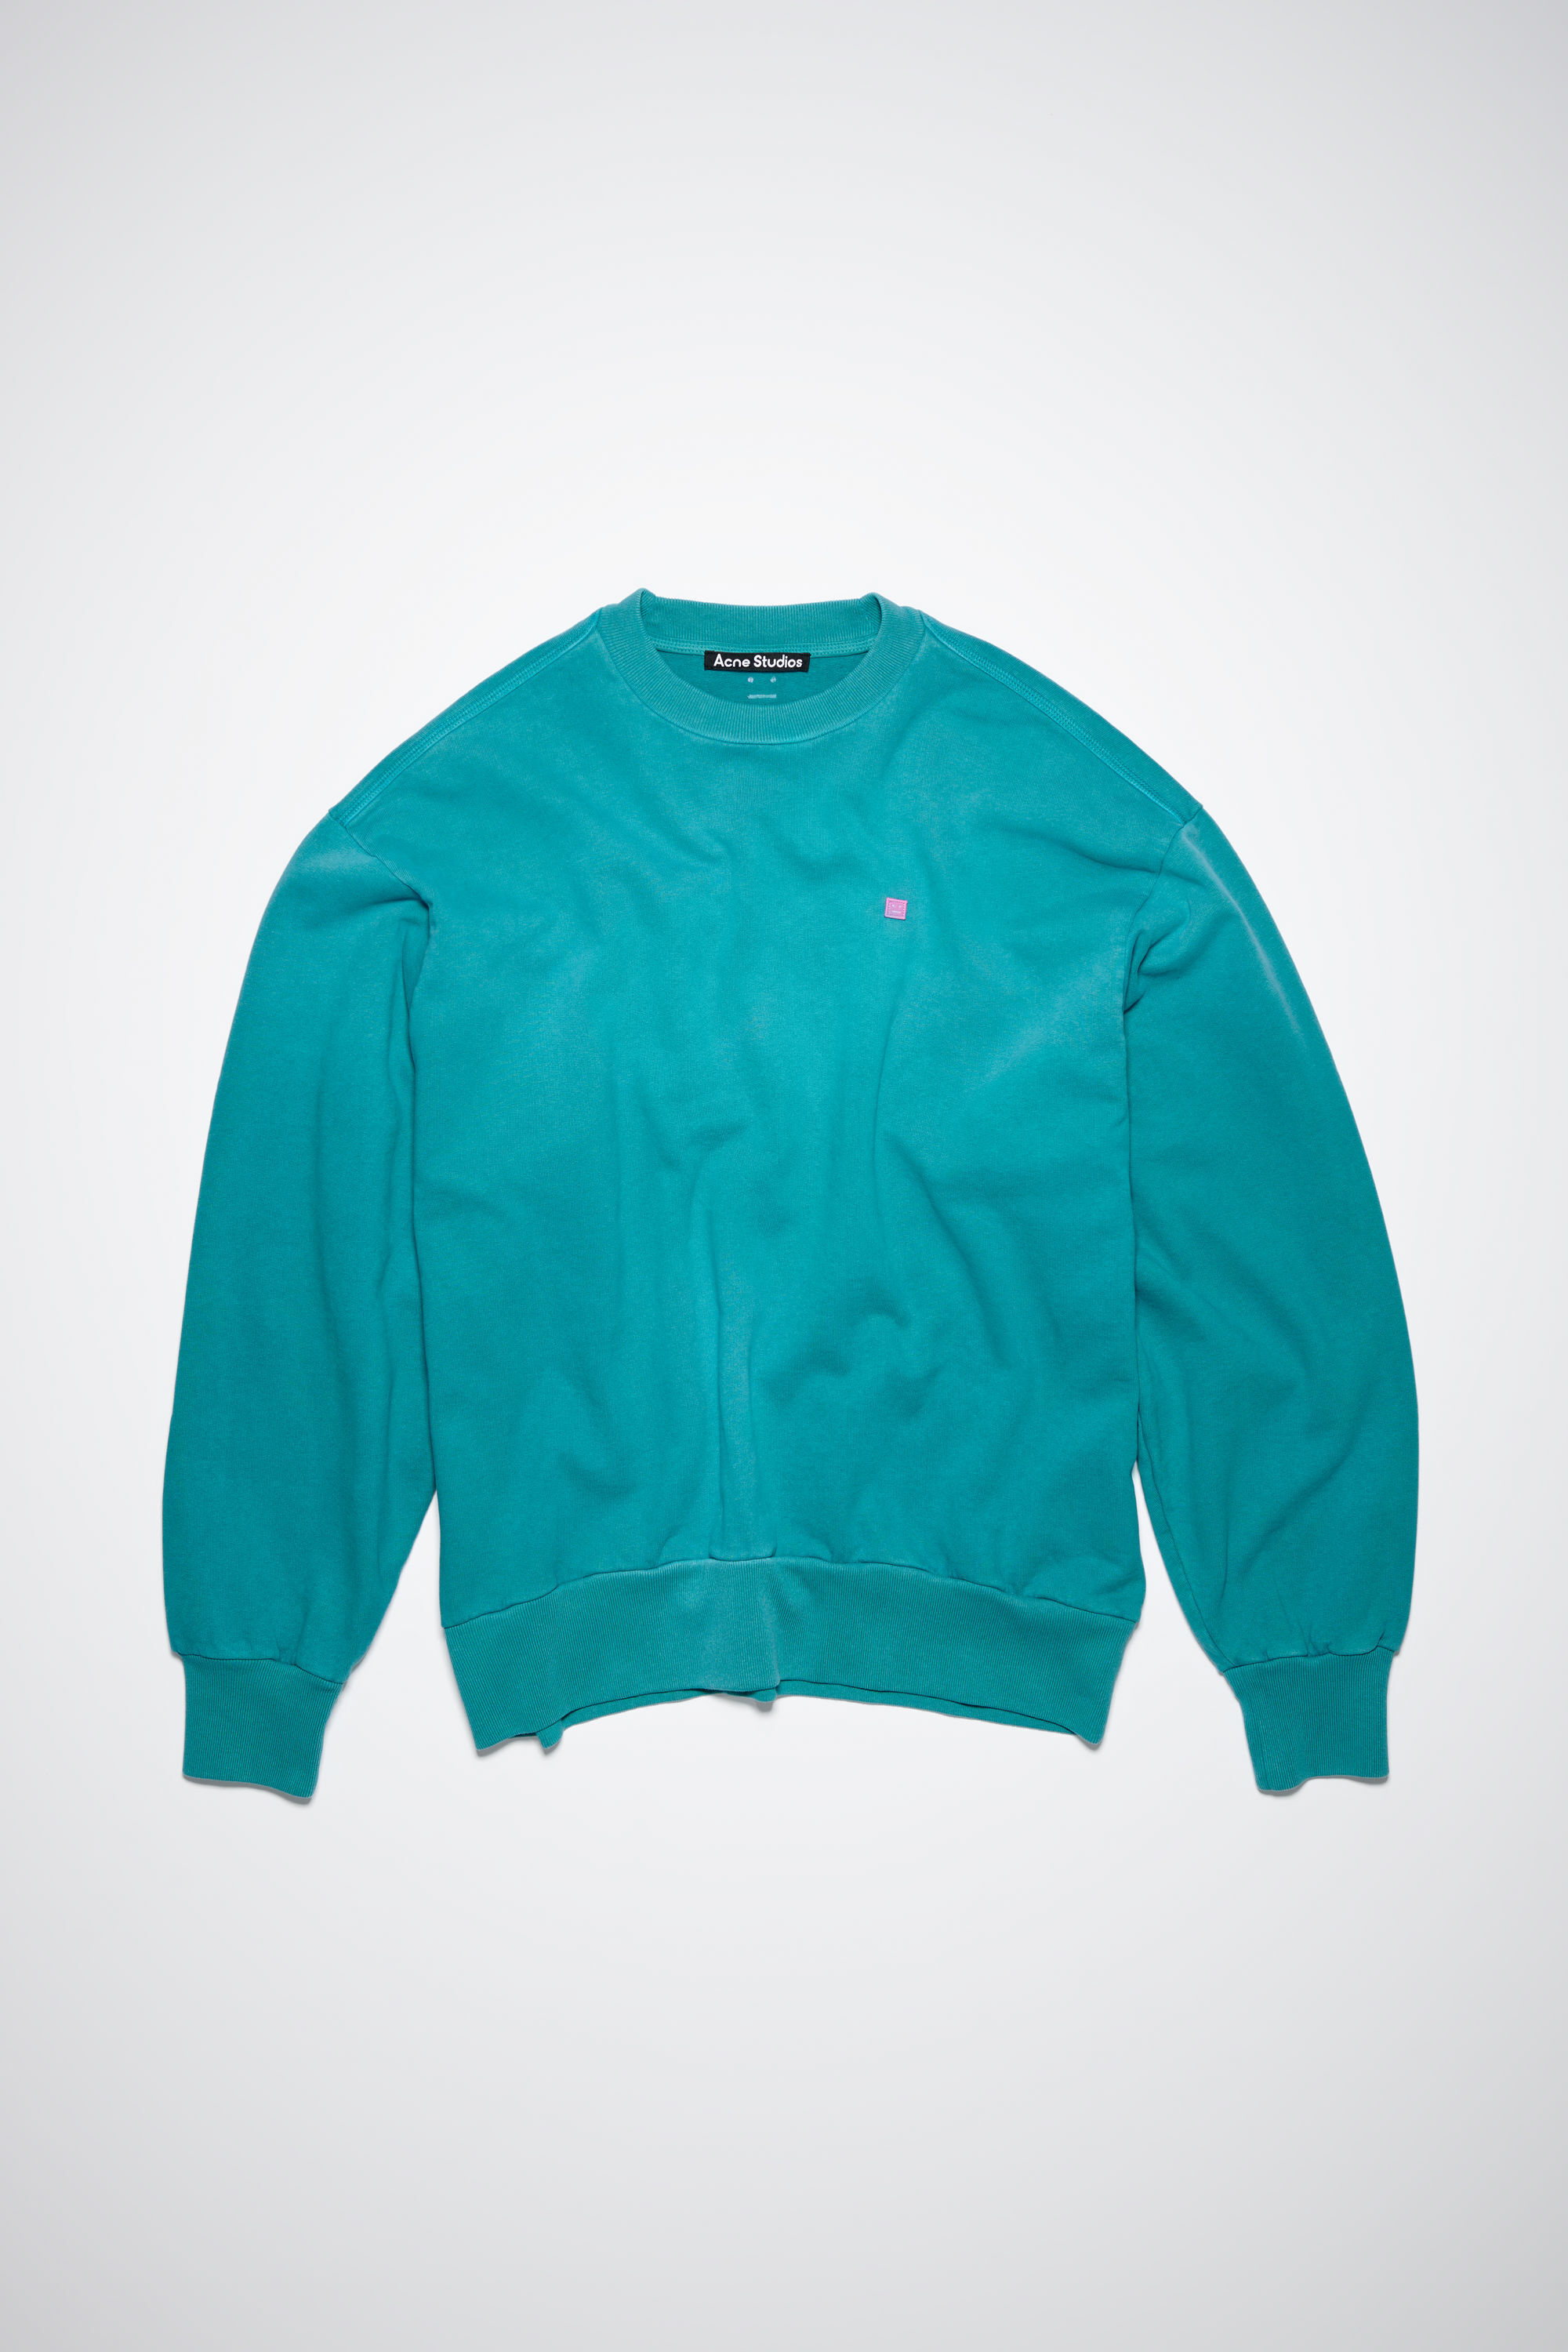 Acne Studios - Crew neck sweater - Relaxed fit - Sea green